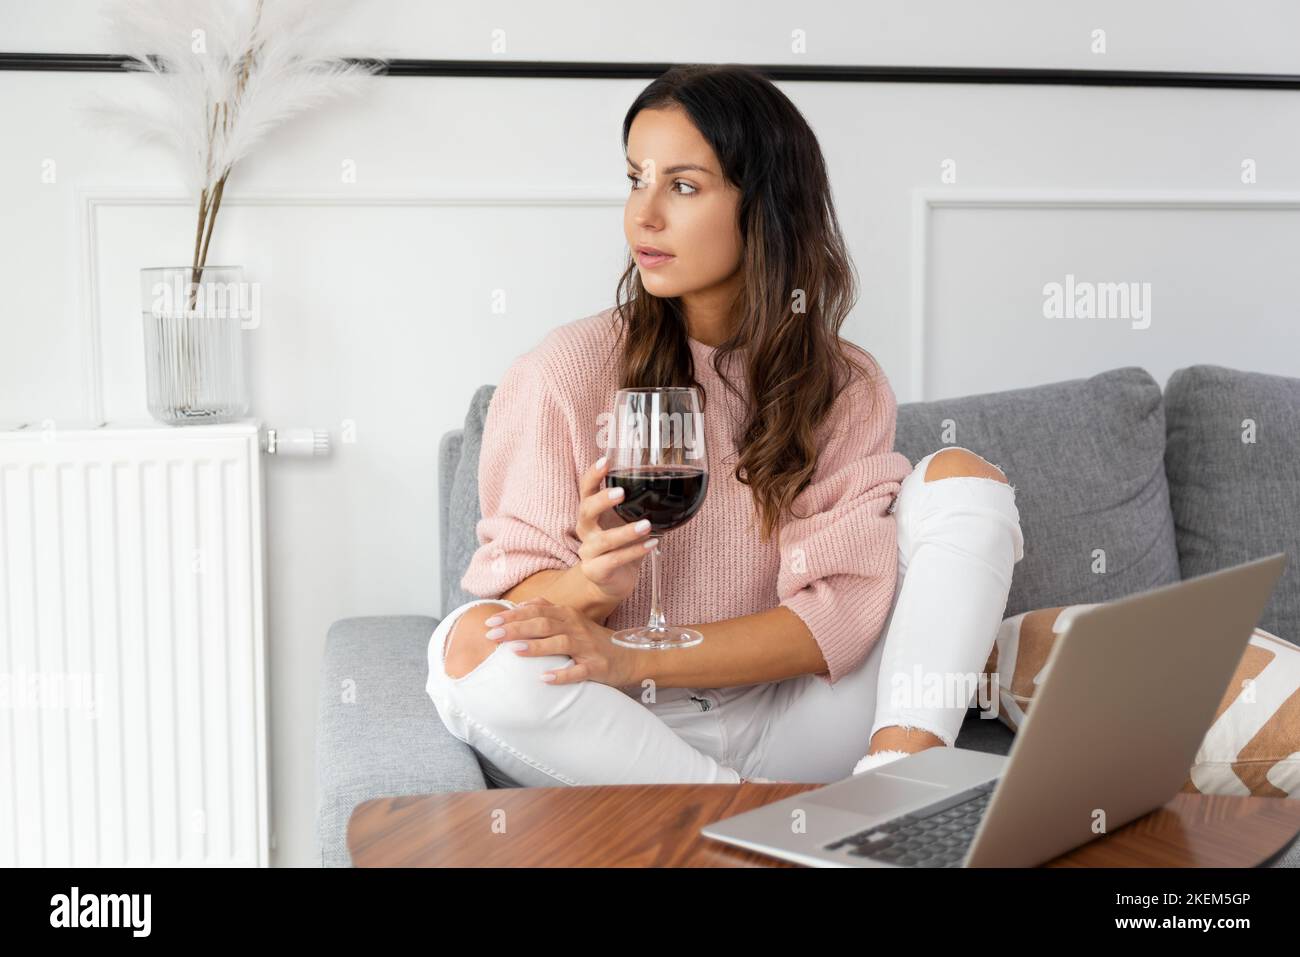 Woman sitting on couch, resting with glass of red wine Stock Photo